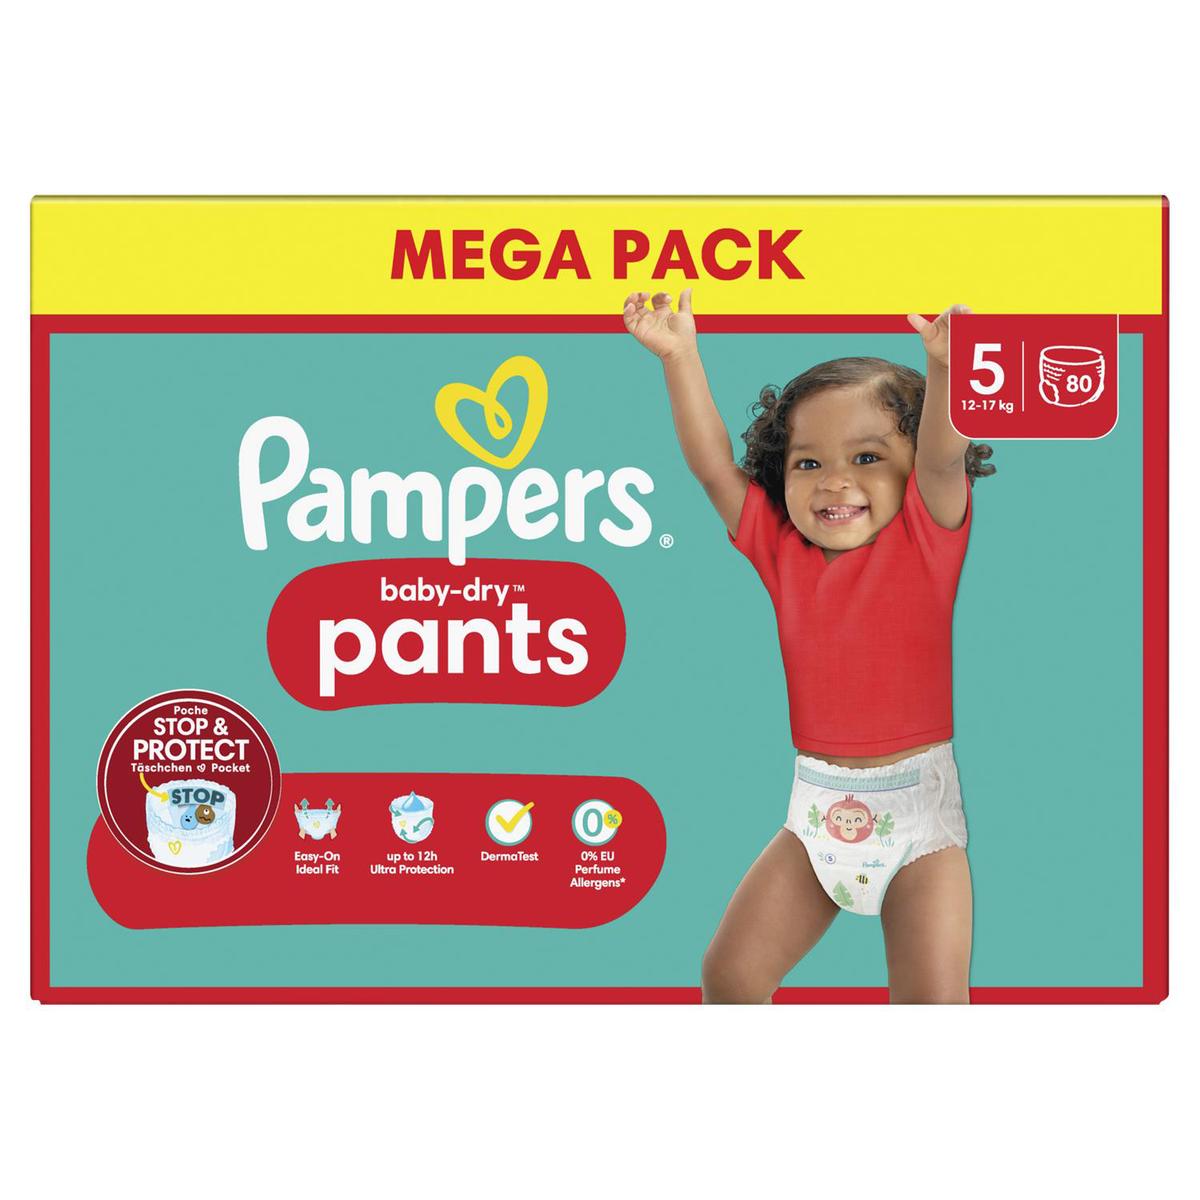 Promotion Pampers Babydry Pants Couches T5 11-16kg, 80 couches culottes